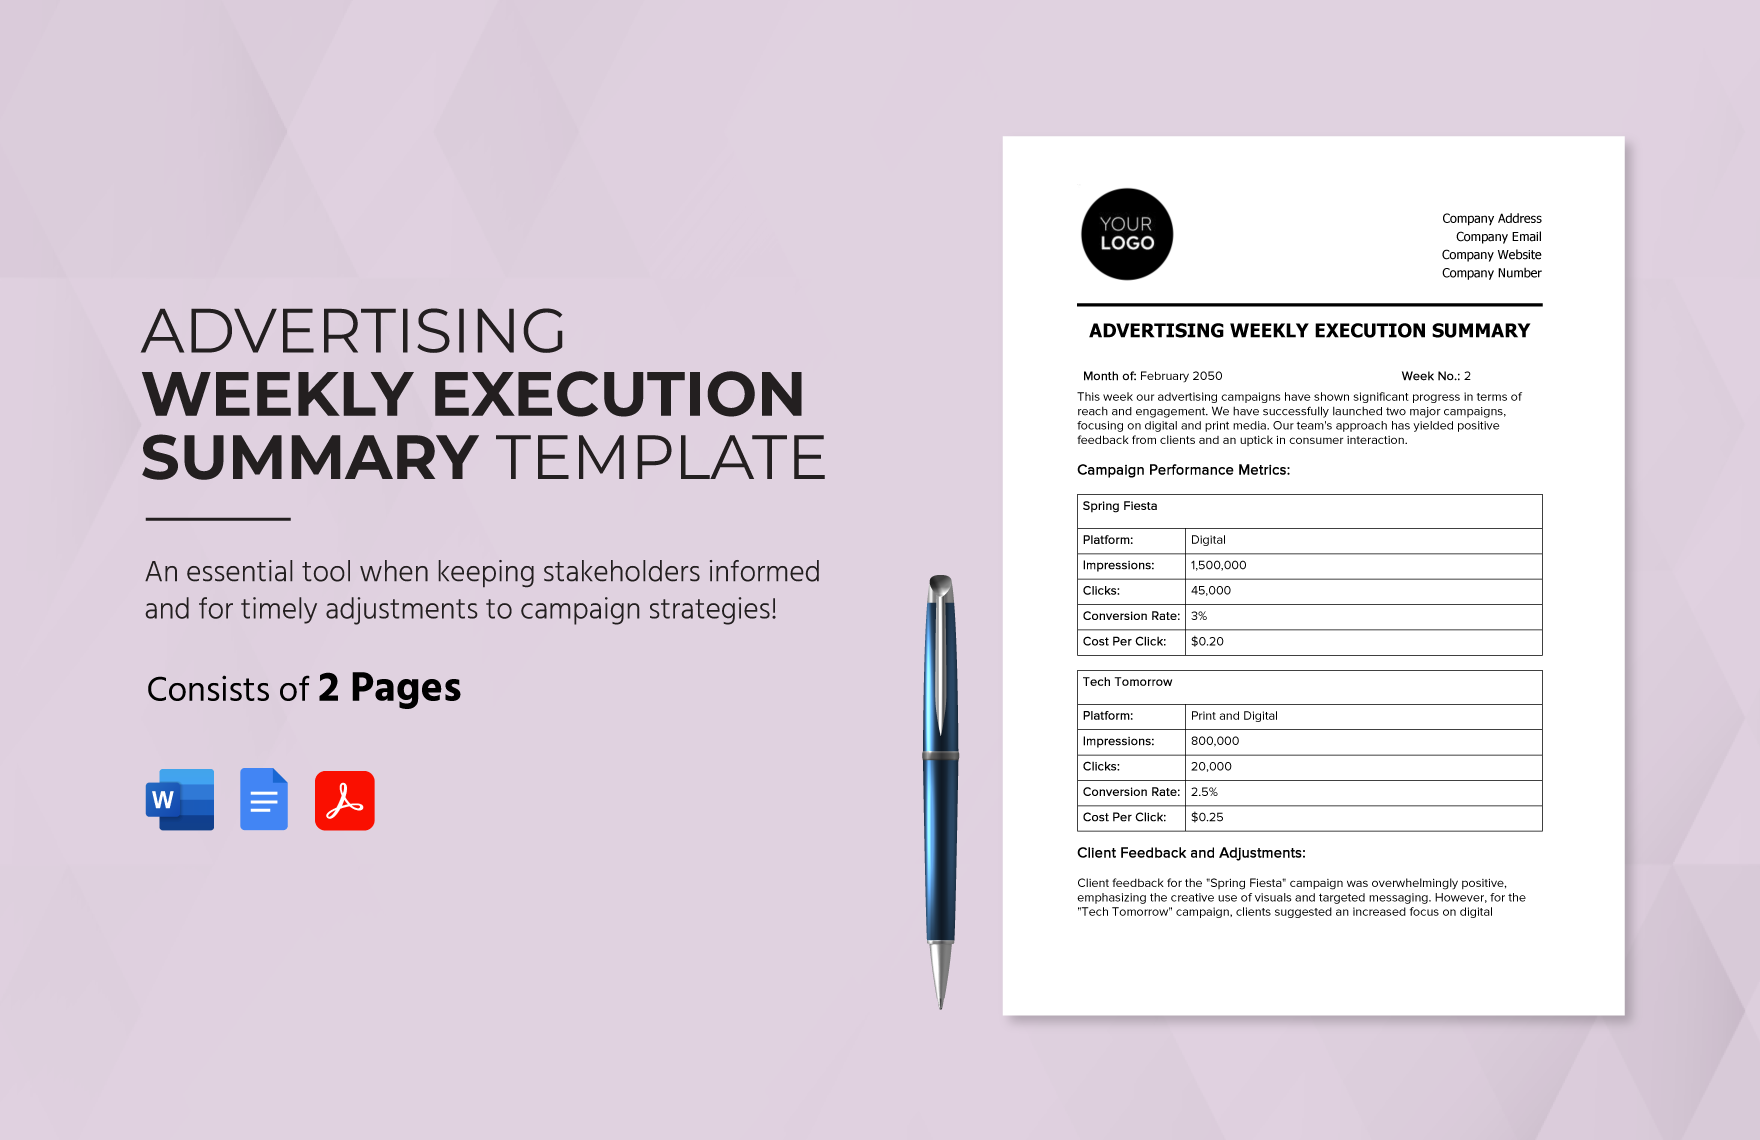 Advertising Weekly Execution Summary Template